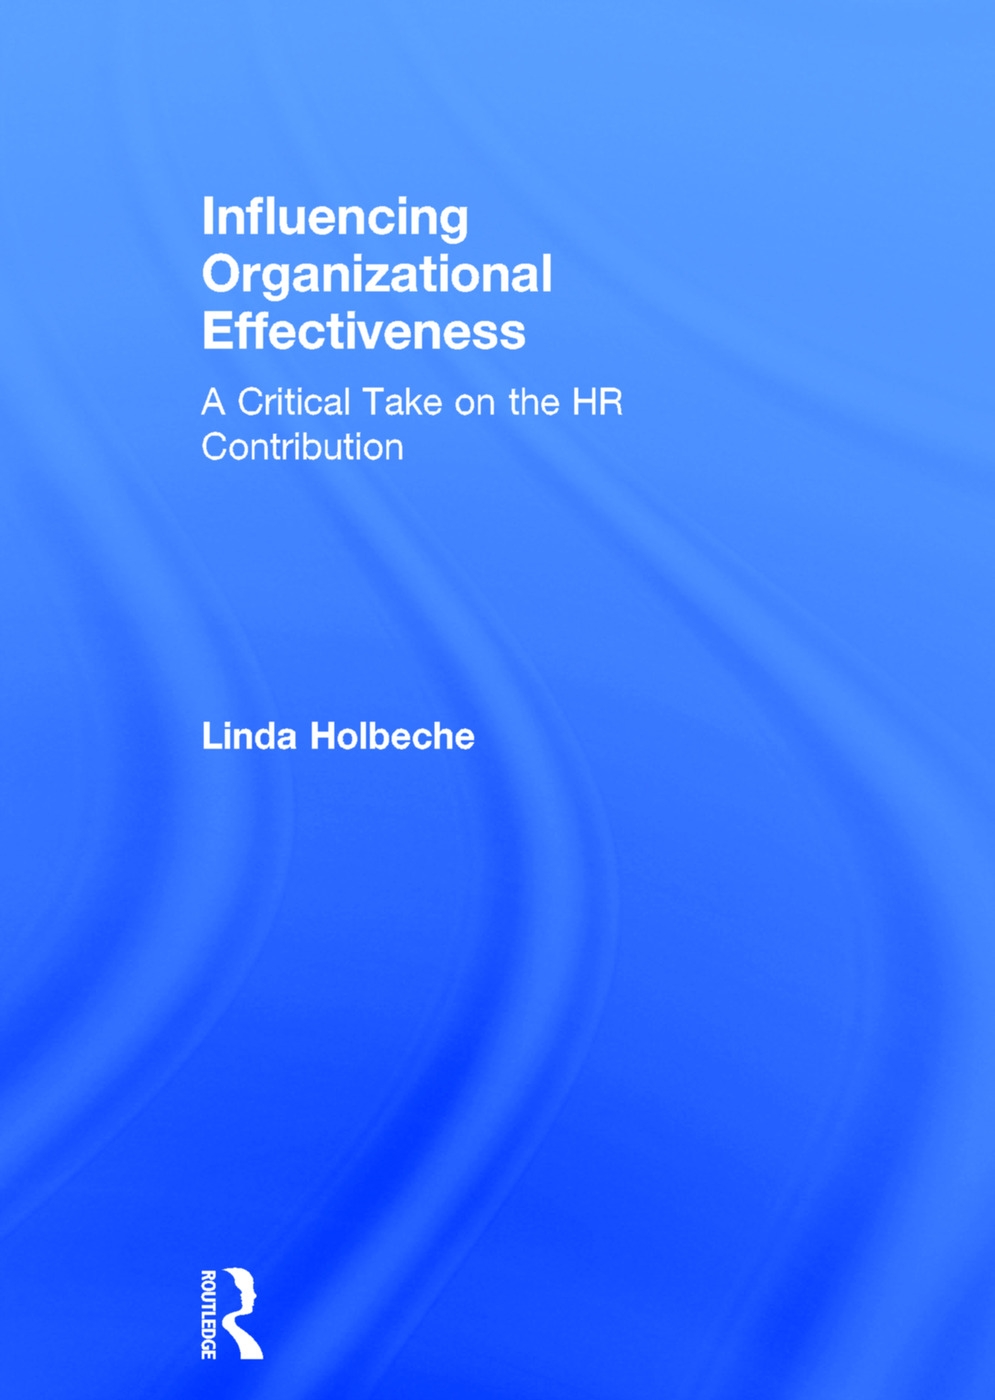 Influencing Organizational Effectiveness: A Critical Take on the HR Contribution